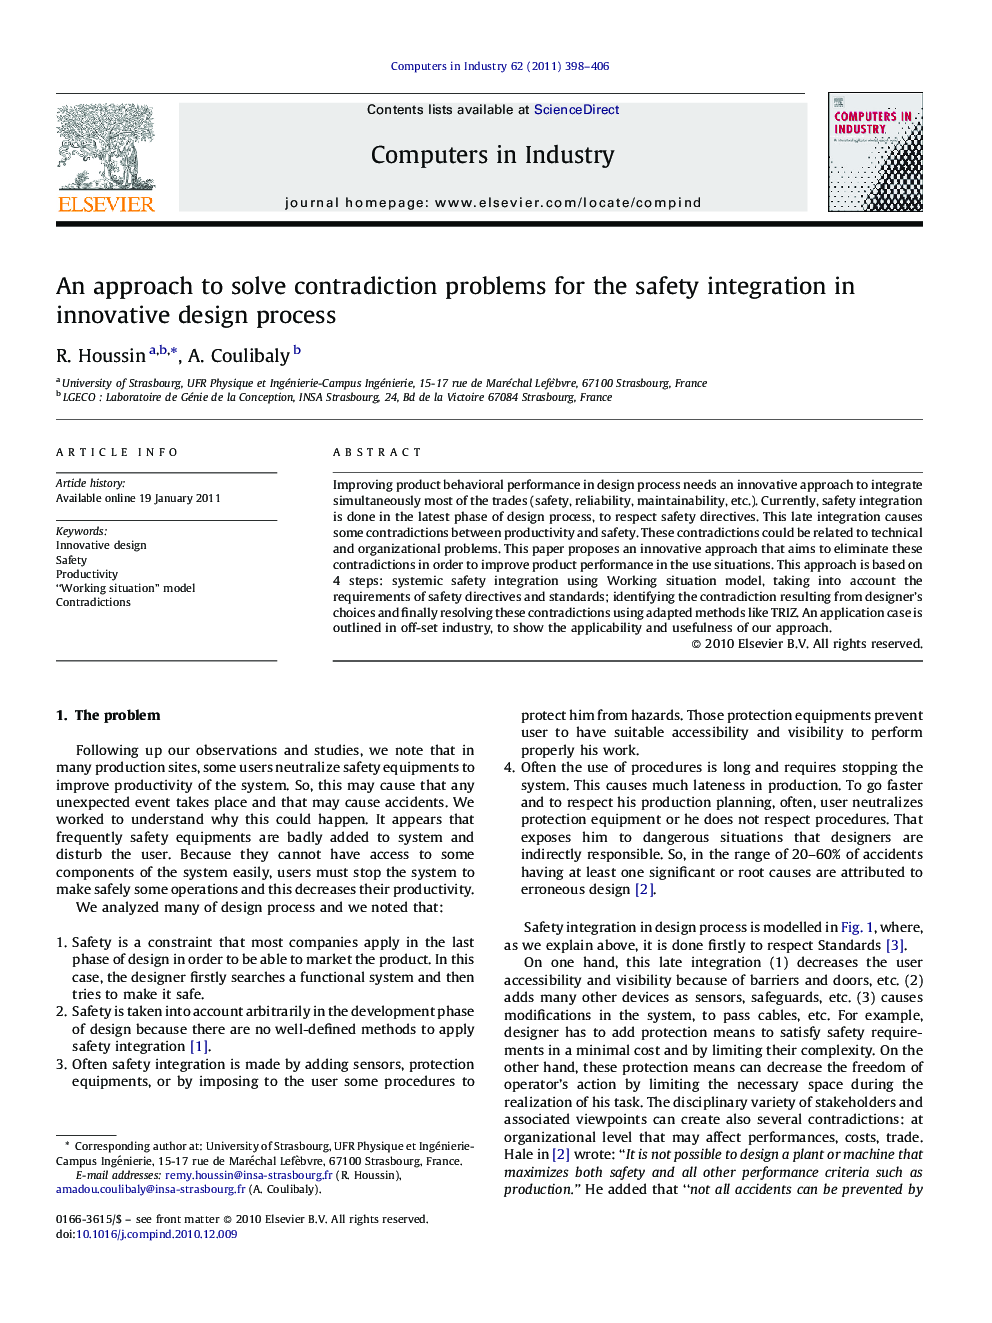 An approach to solve contradiction problems for the safety integration in innovative design process